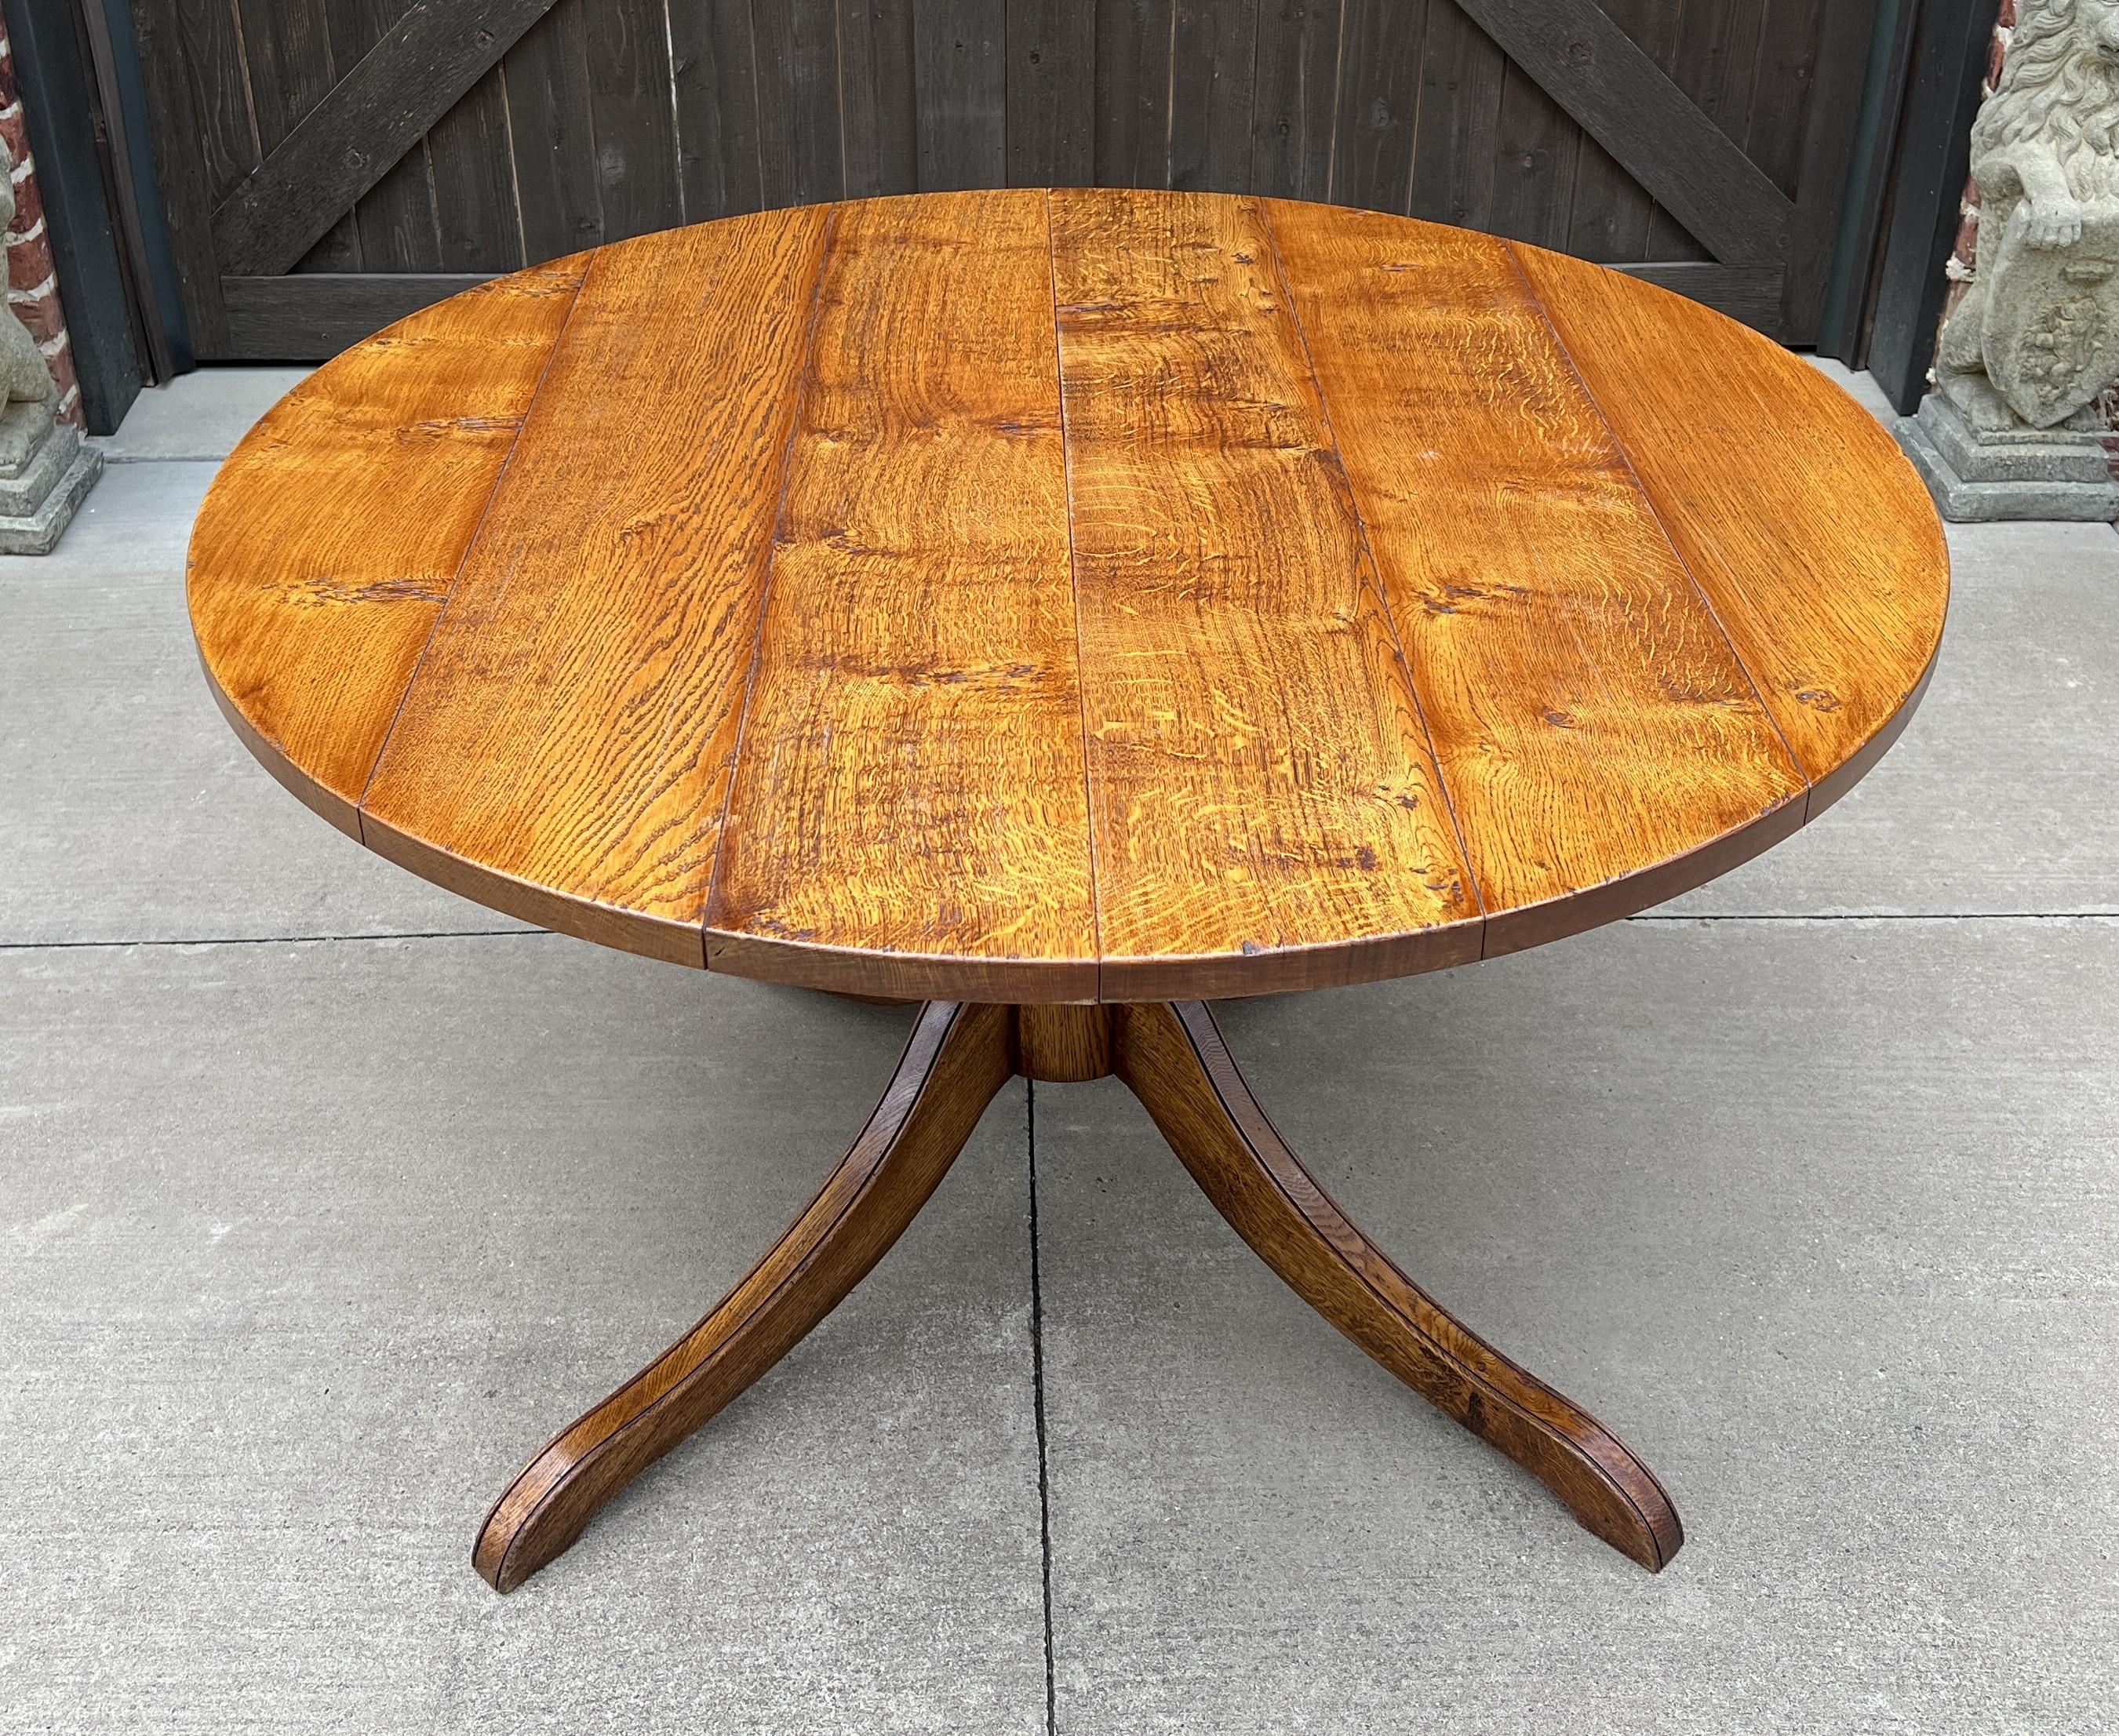 OUTSTANDING Vintage midcentury English Oak dining table or game table with Leaf on Pedestal Base~~ROUND/OVAL~~circa 1940s

 Beautiful oak top with 4-legged pedestal base ~~beautiful rich honey oak patina and full of character!

 Versatile